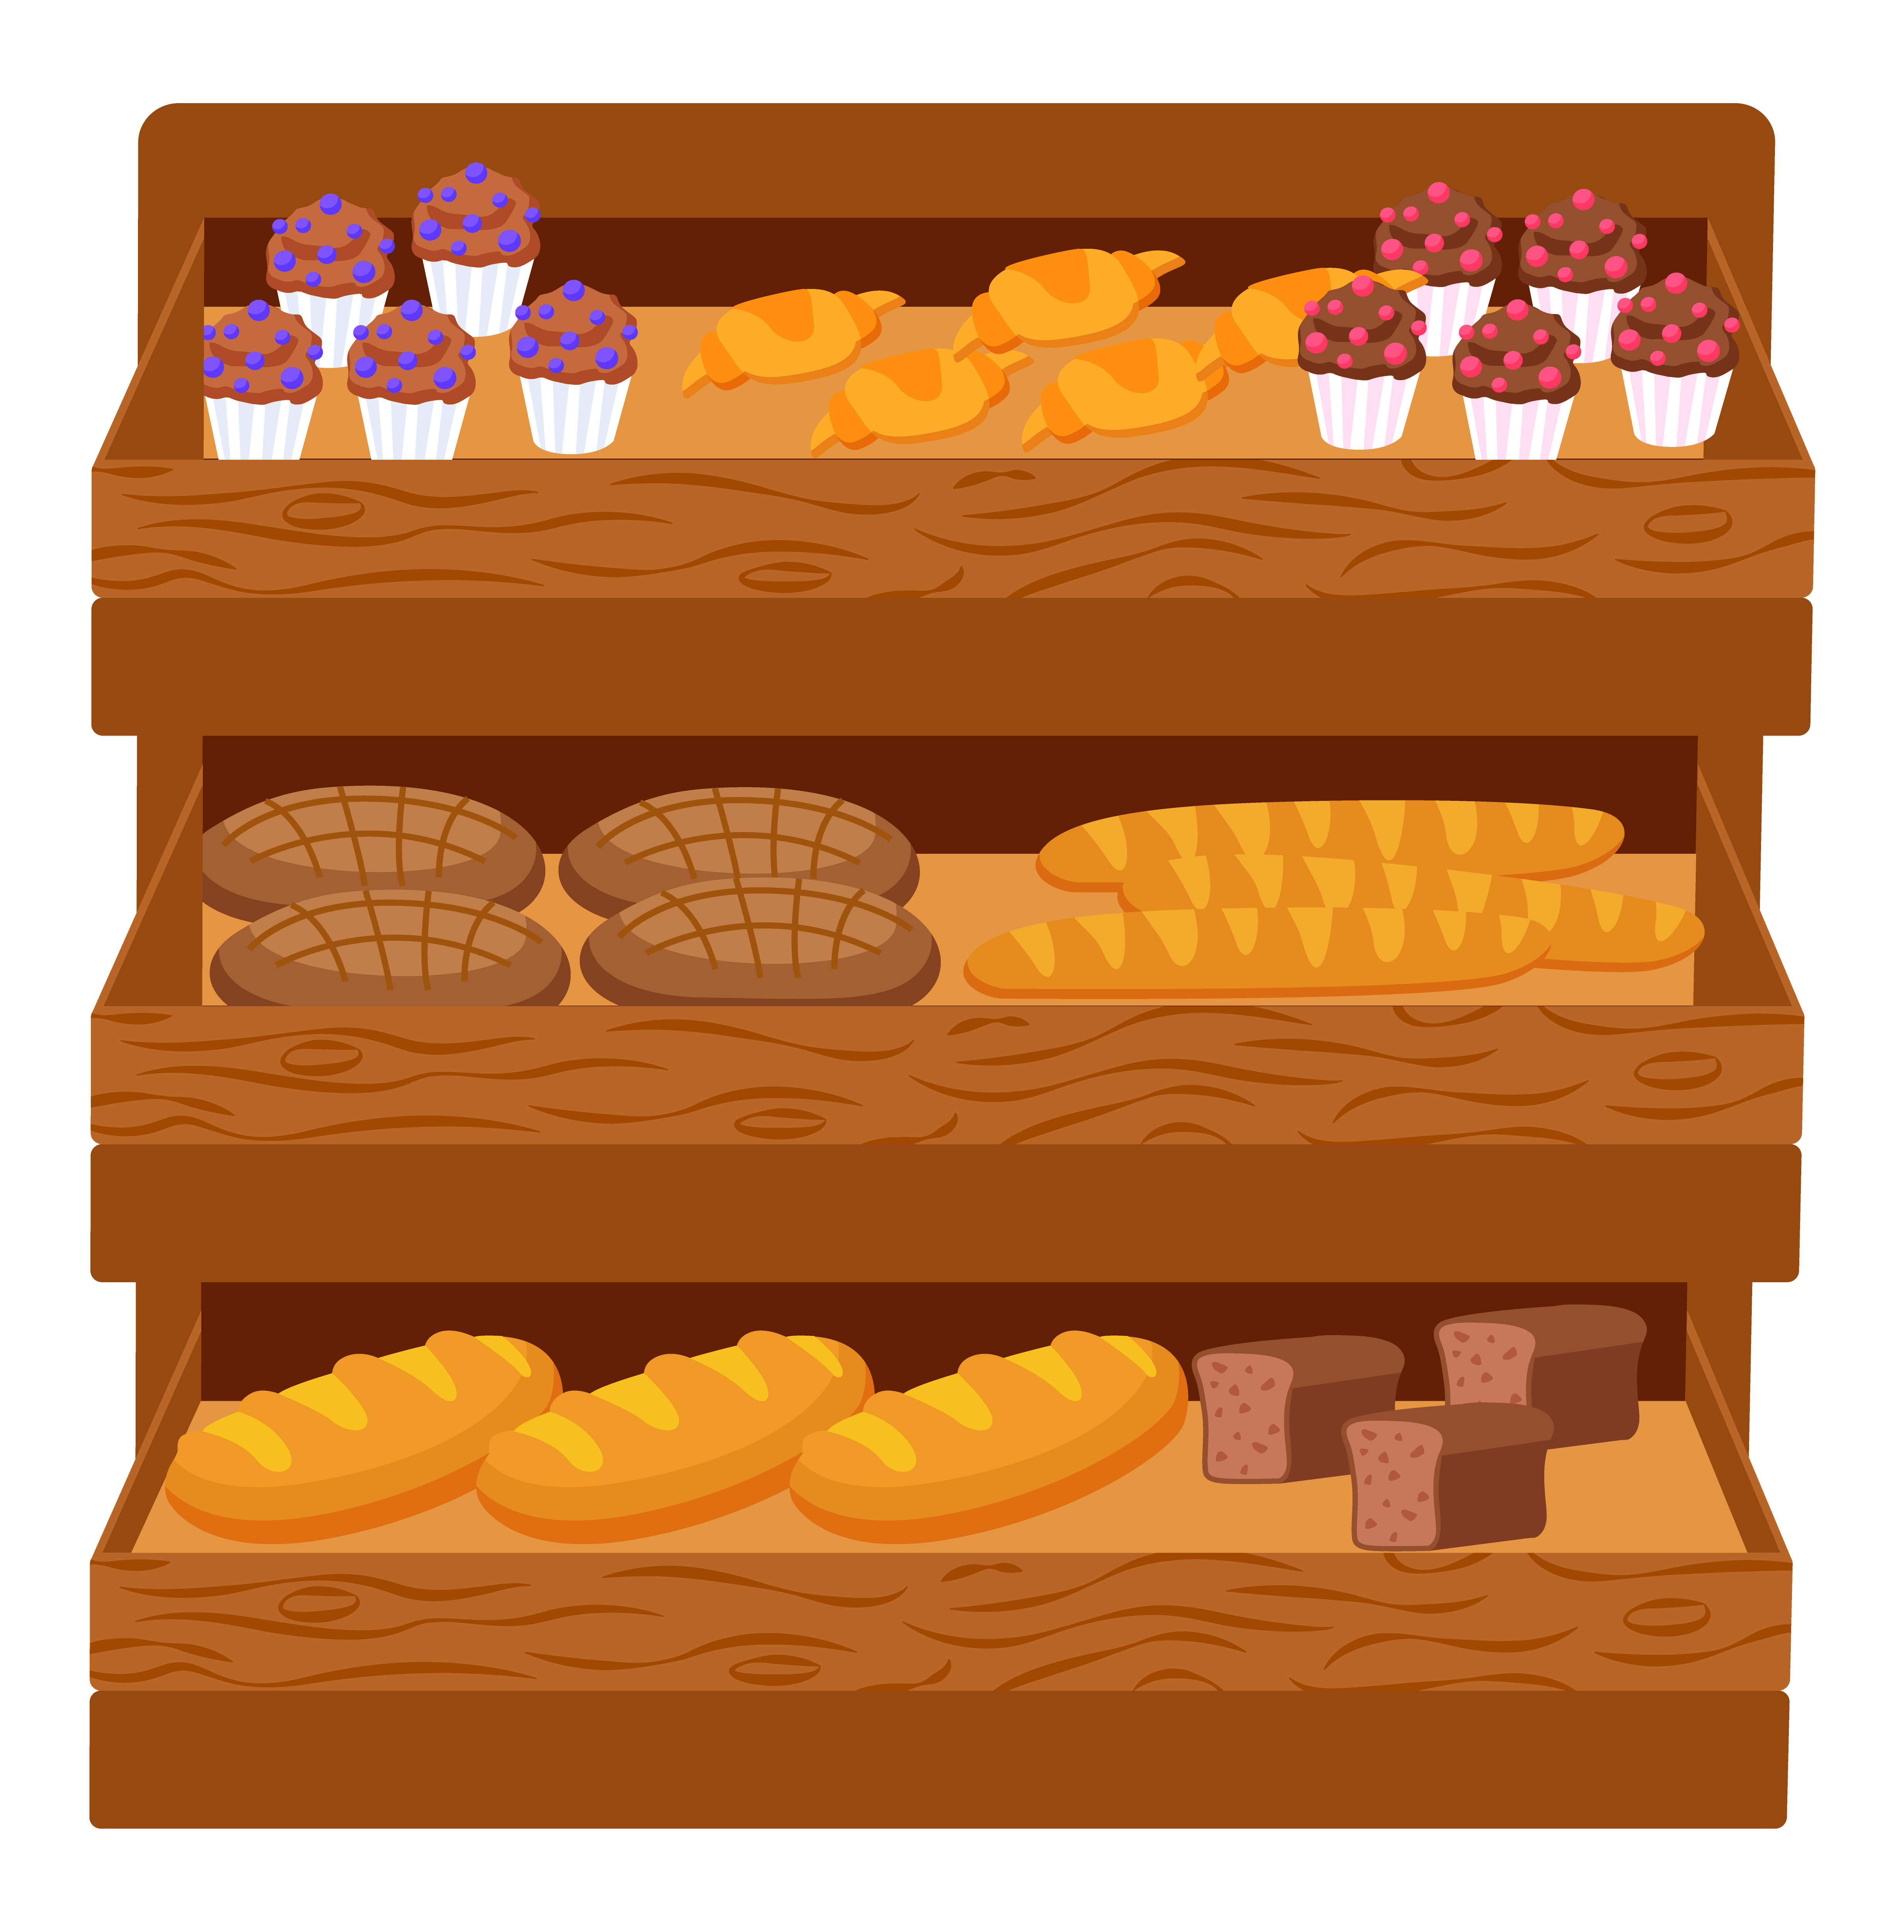 Bakery shop assortment on wooden shelf. Isolated display with products of store. Cakes and croissants, baguette and french buns set. Cupcakes with decorated top and loaf of bread vector in flat. Bakery Shop Assortment with Bread and Cakes Set